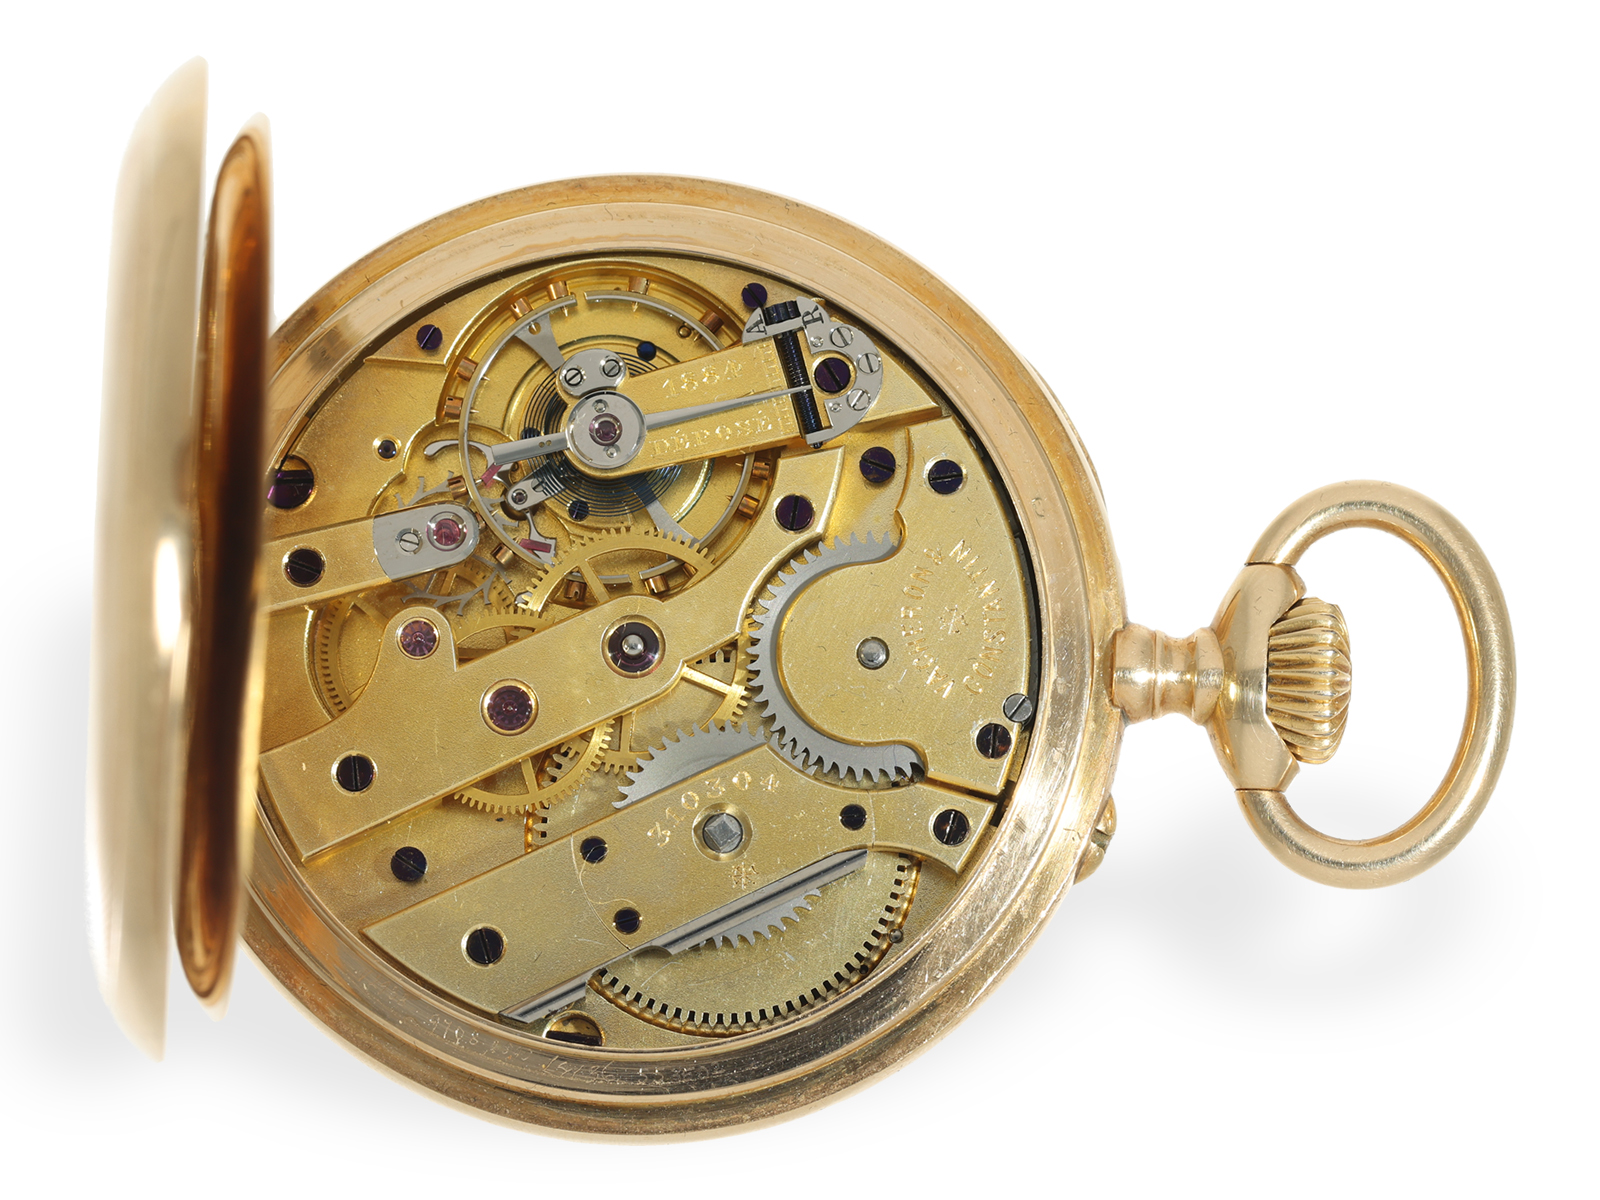 Pocket watch: very well preserved pocket chronometer by Vacheron & Constantin, ca. 1905 - Image 3 of 6